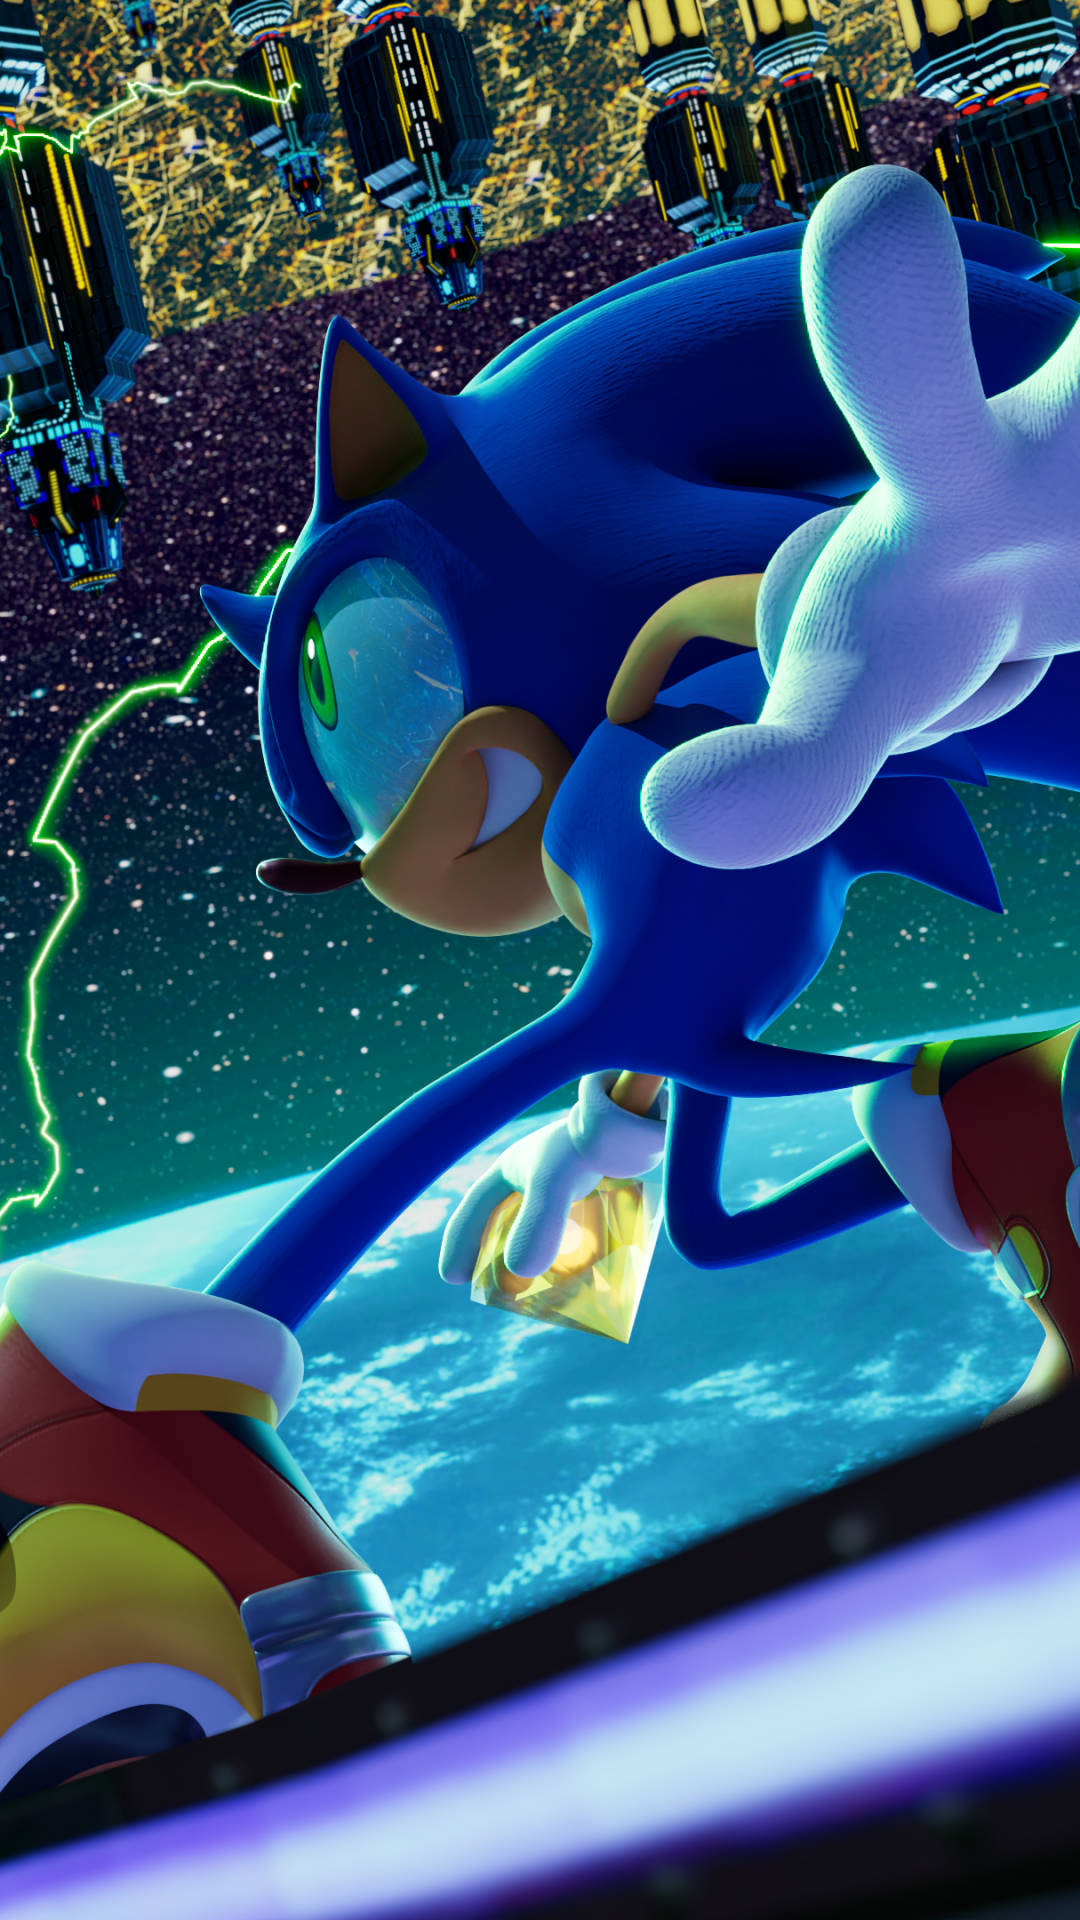 "Feel the coolness with Sonic!" Wallpaper